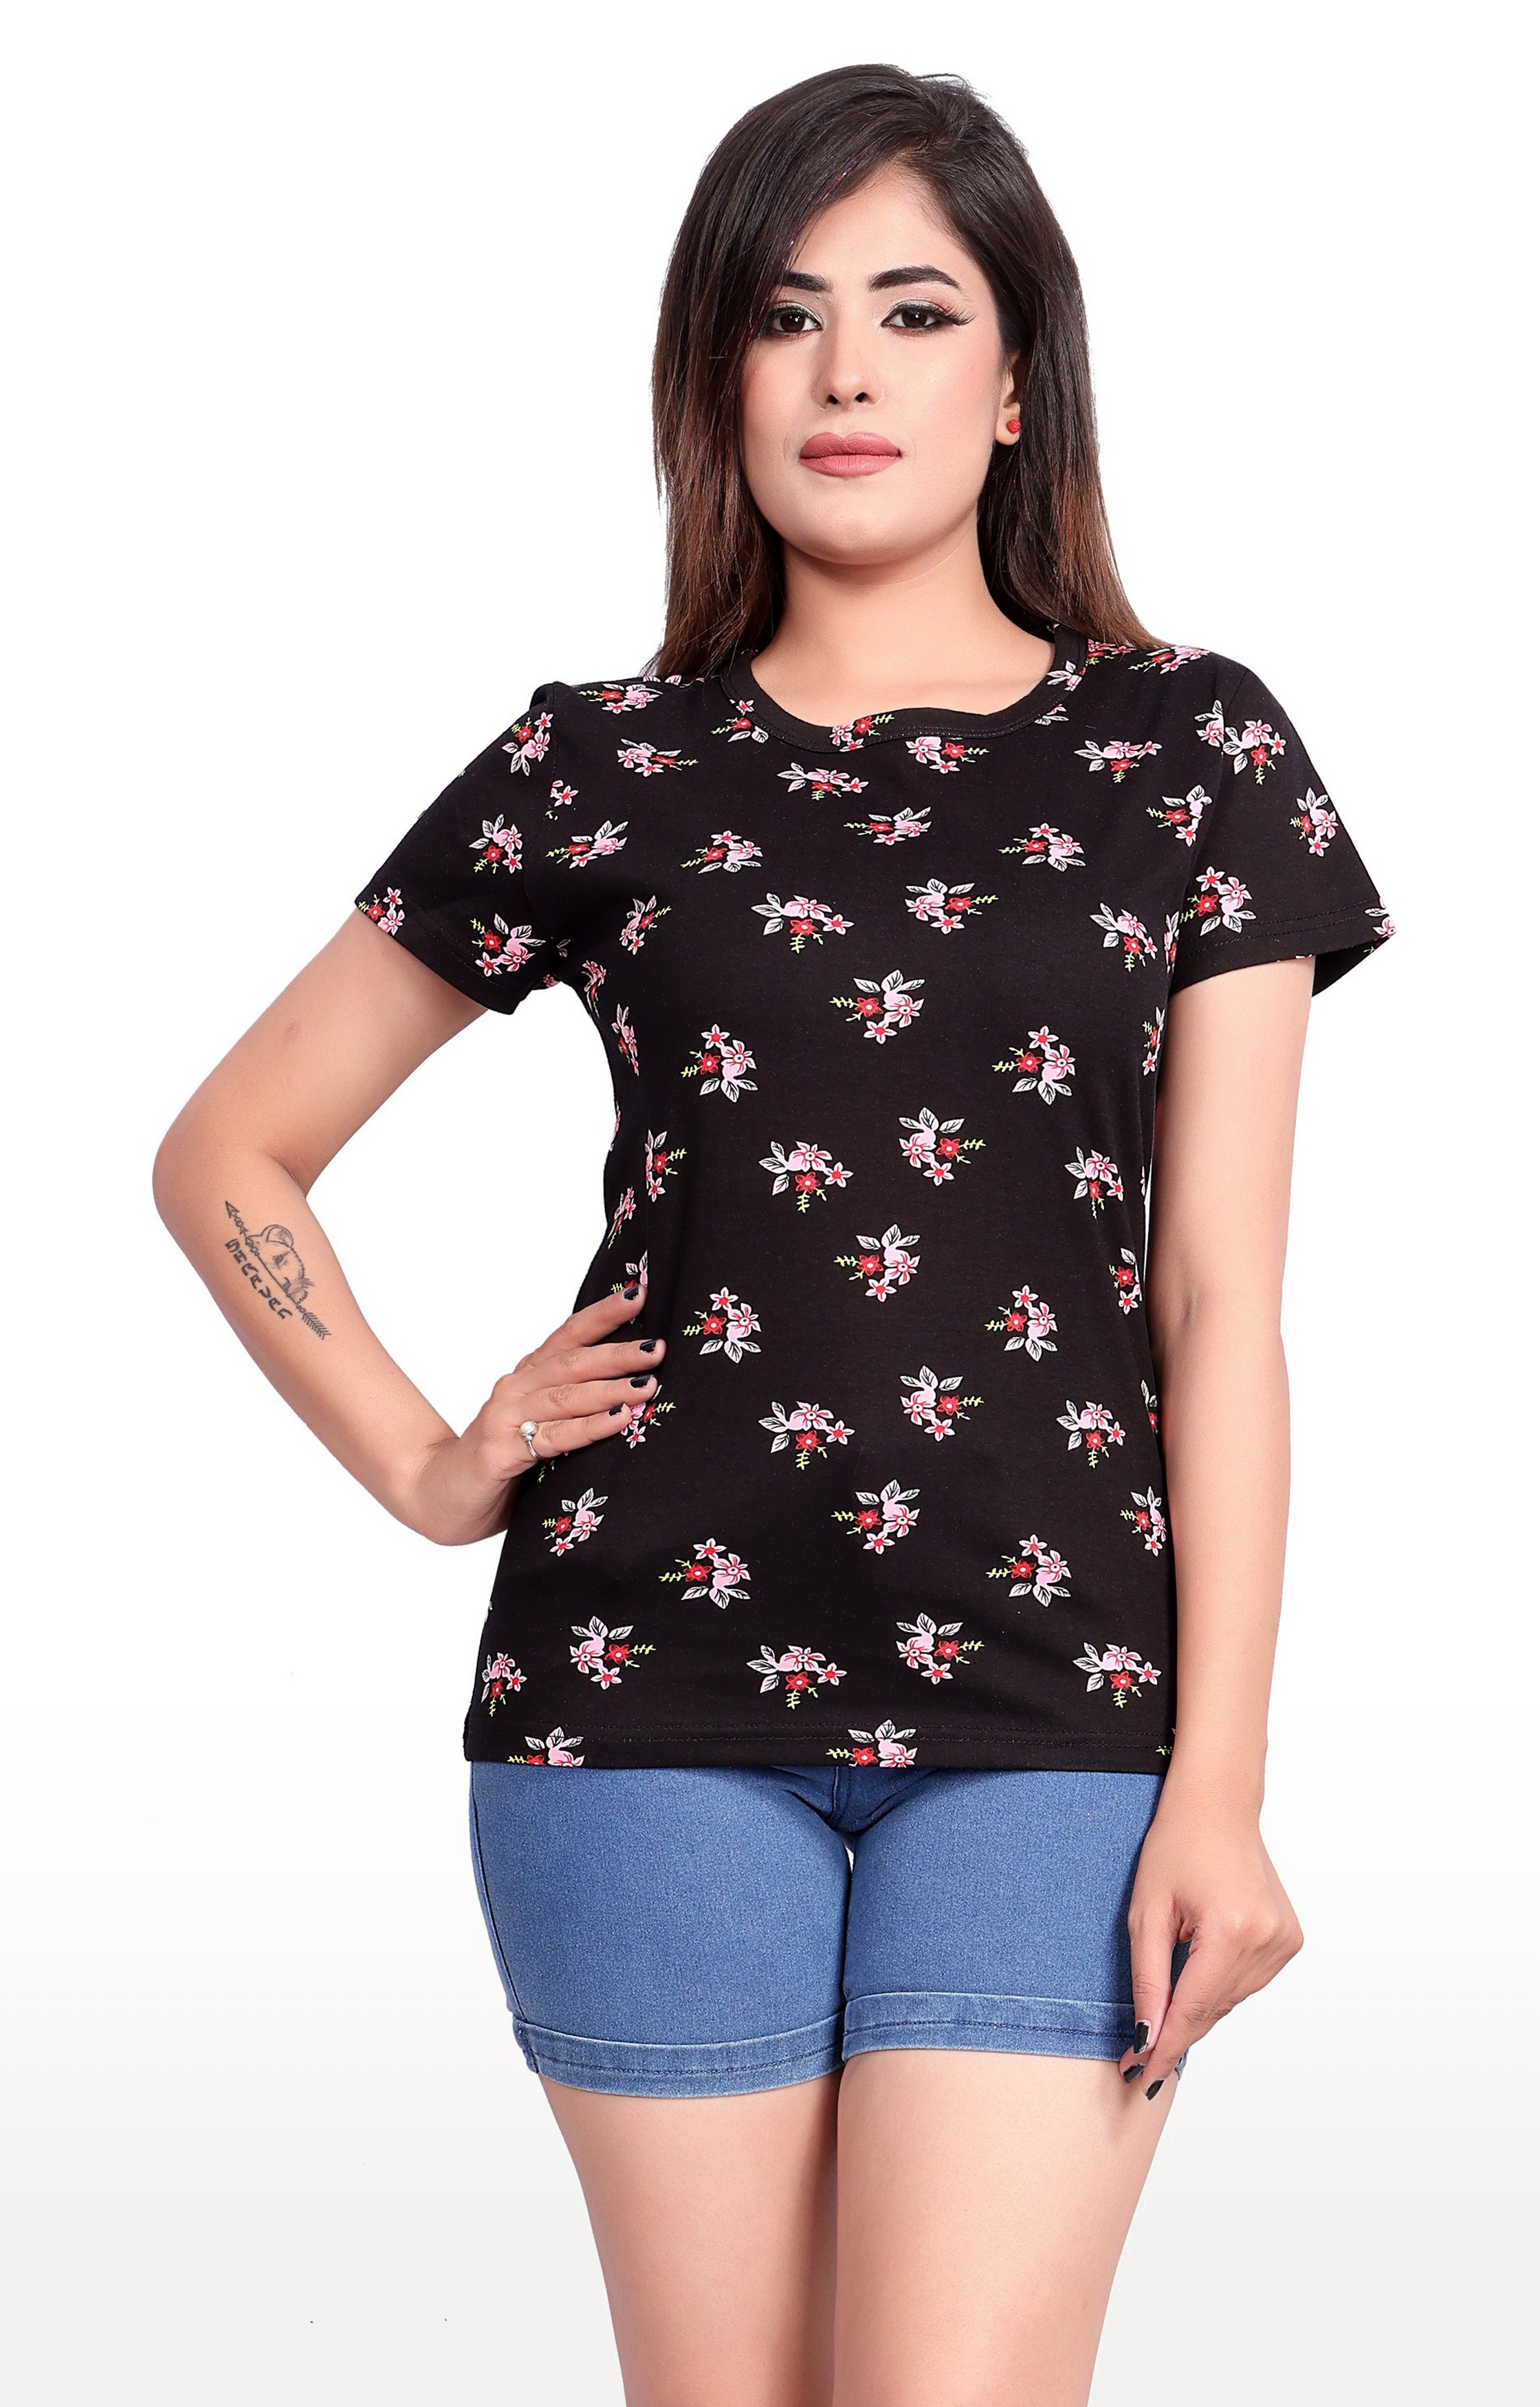 Impex | Impex Women's Black Cotton Hosiery Printed Floral Round Neck T-shirt 0